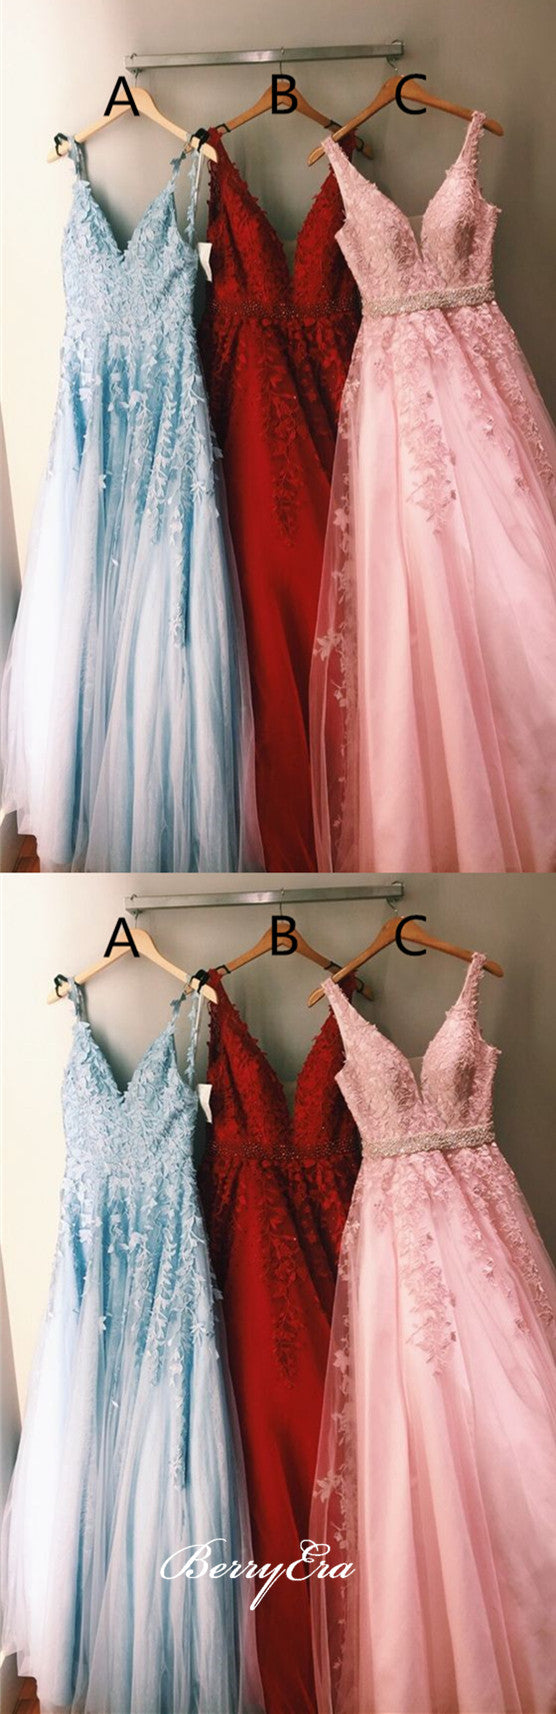 Populae Lace Tulle Prom Dresses, Newest Prom Dresses, 2019 Prom Dresses